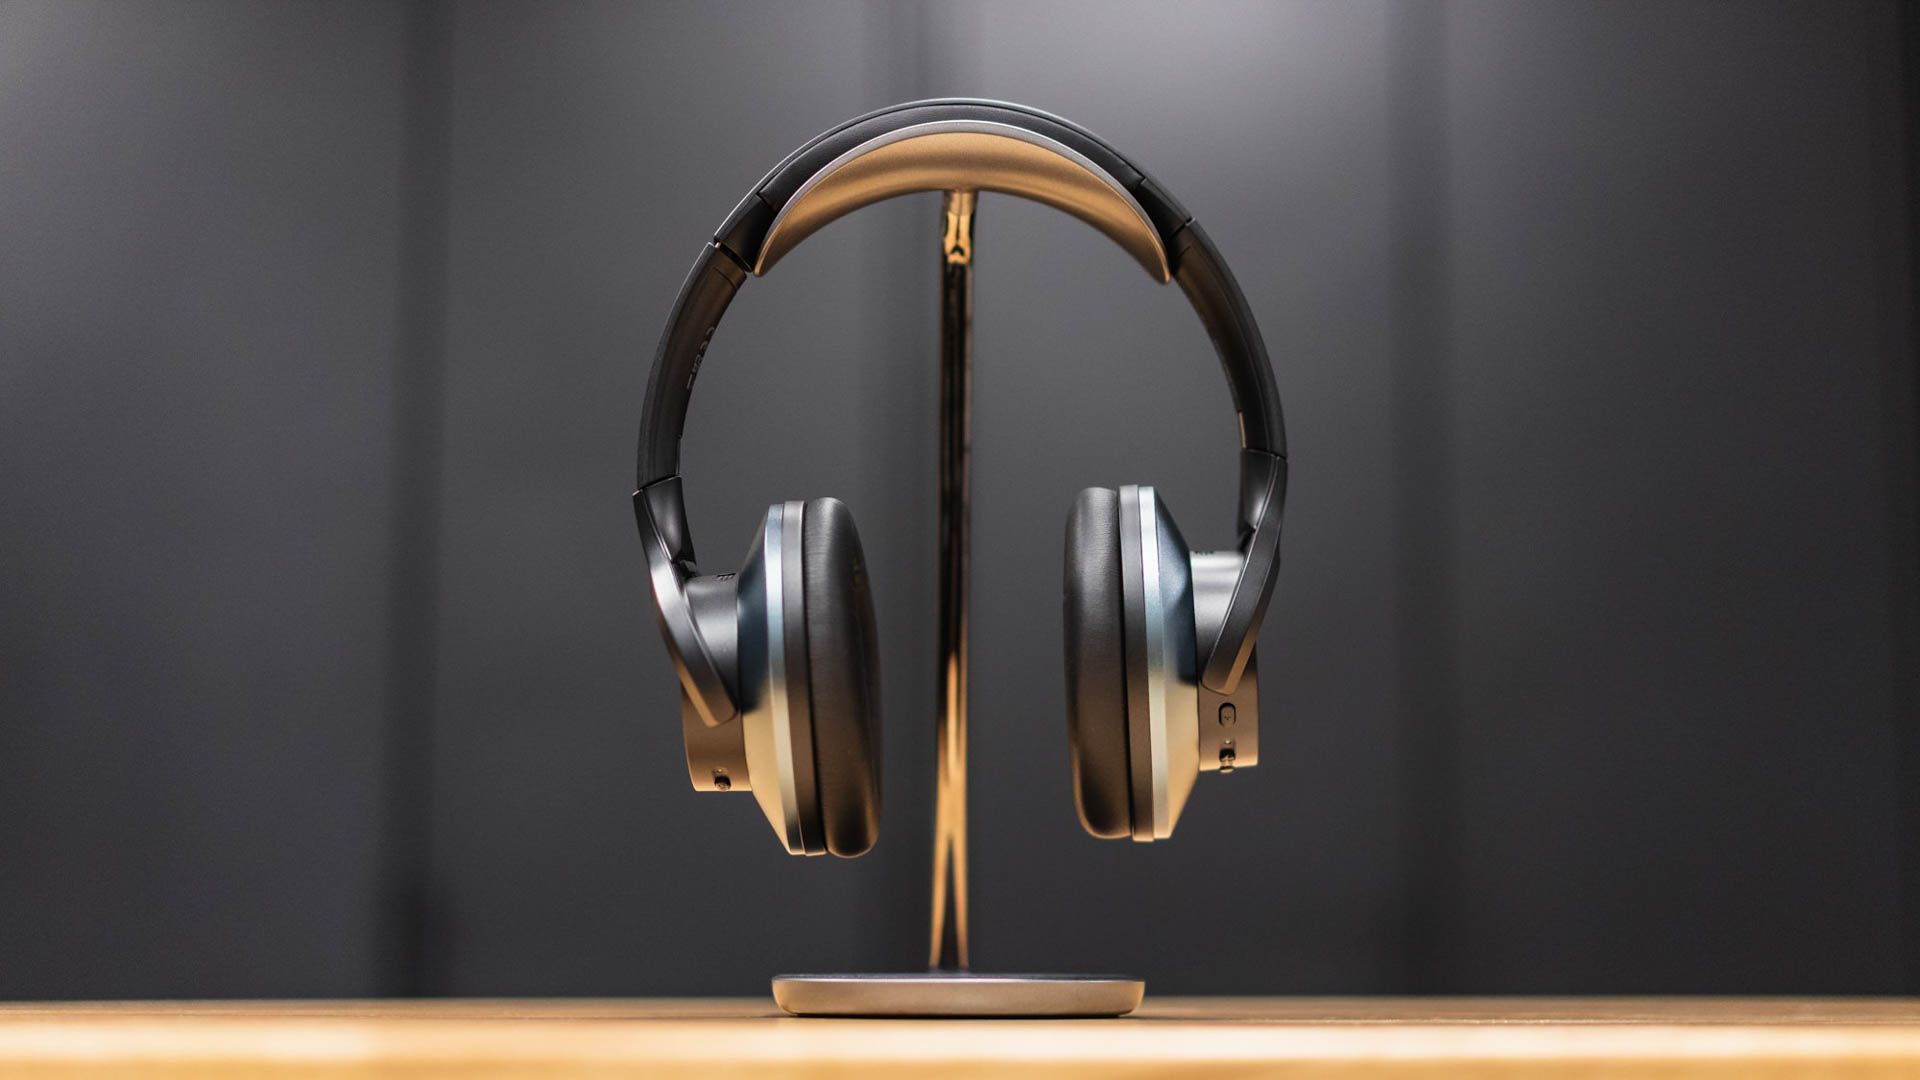 OneOdio A10 Hybrid Active Noise Cancelling Headphones on a headphone stand